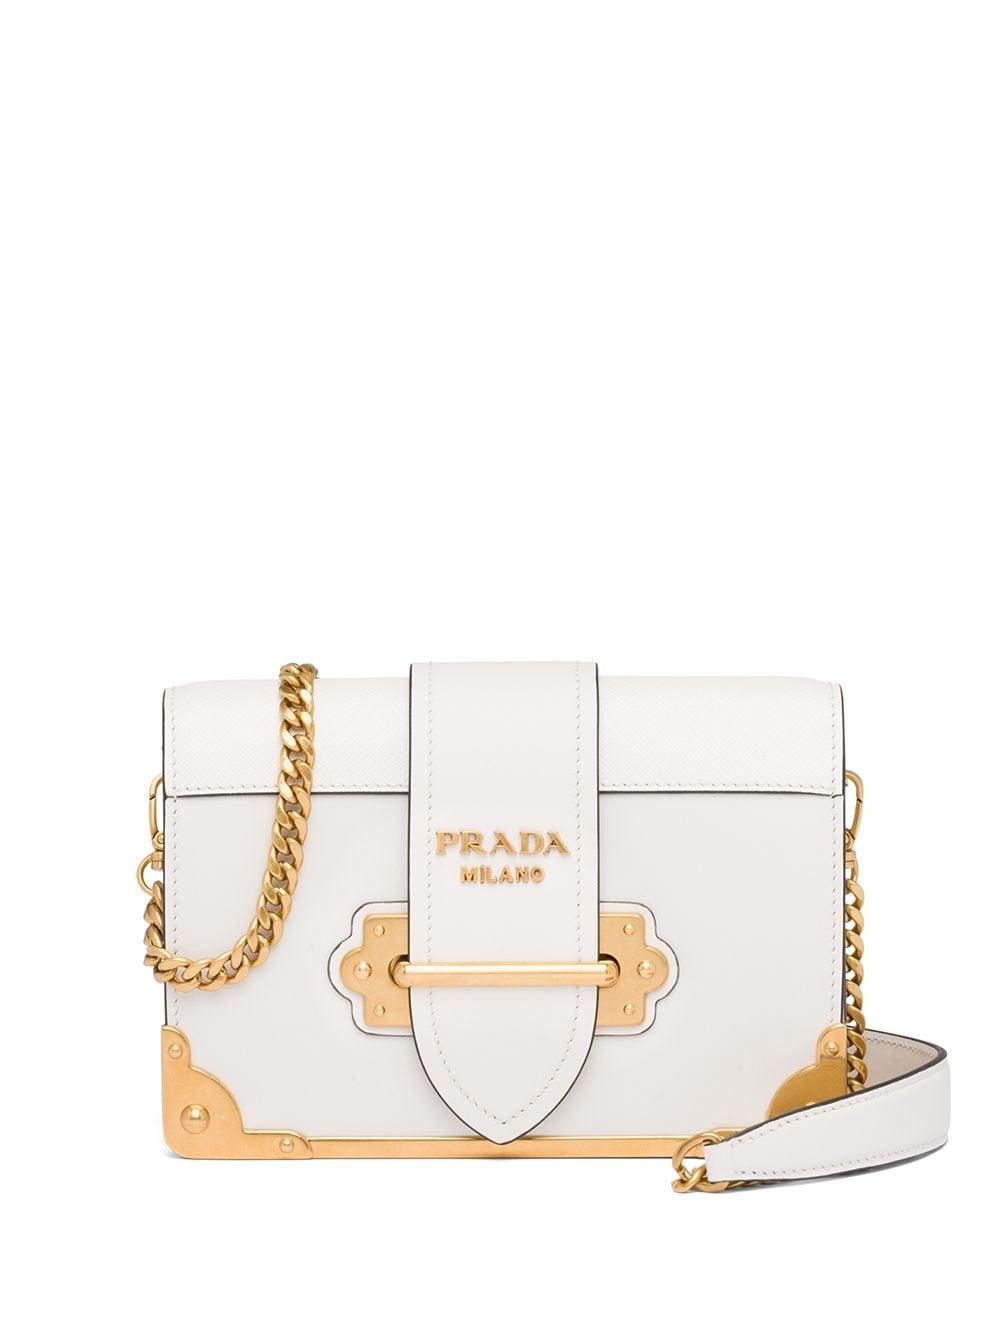 Prada Leather Cahier Bag in White | Lyst